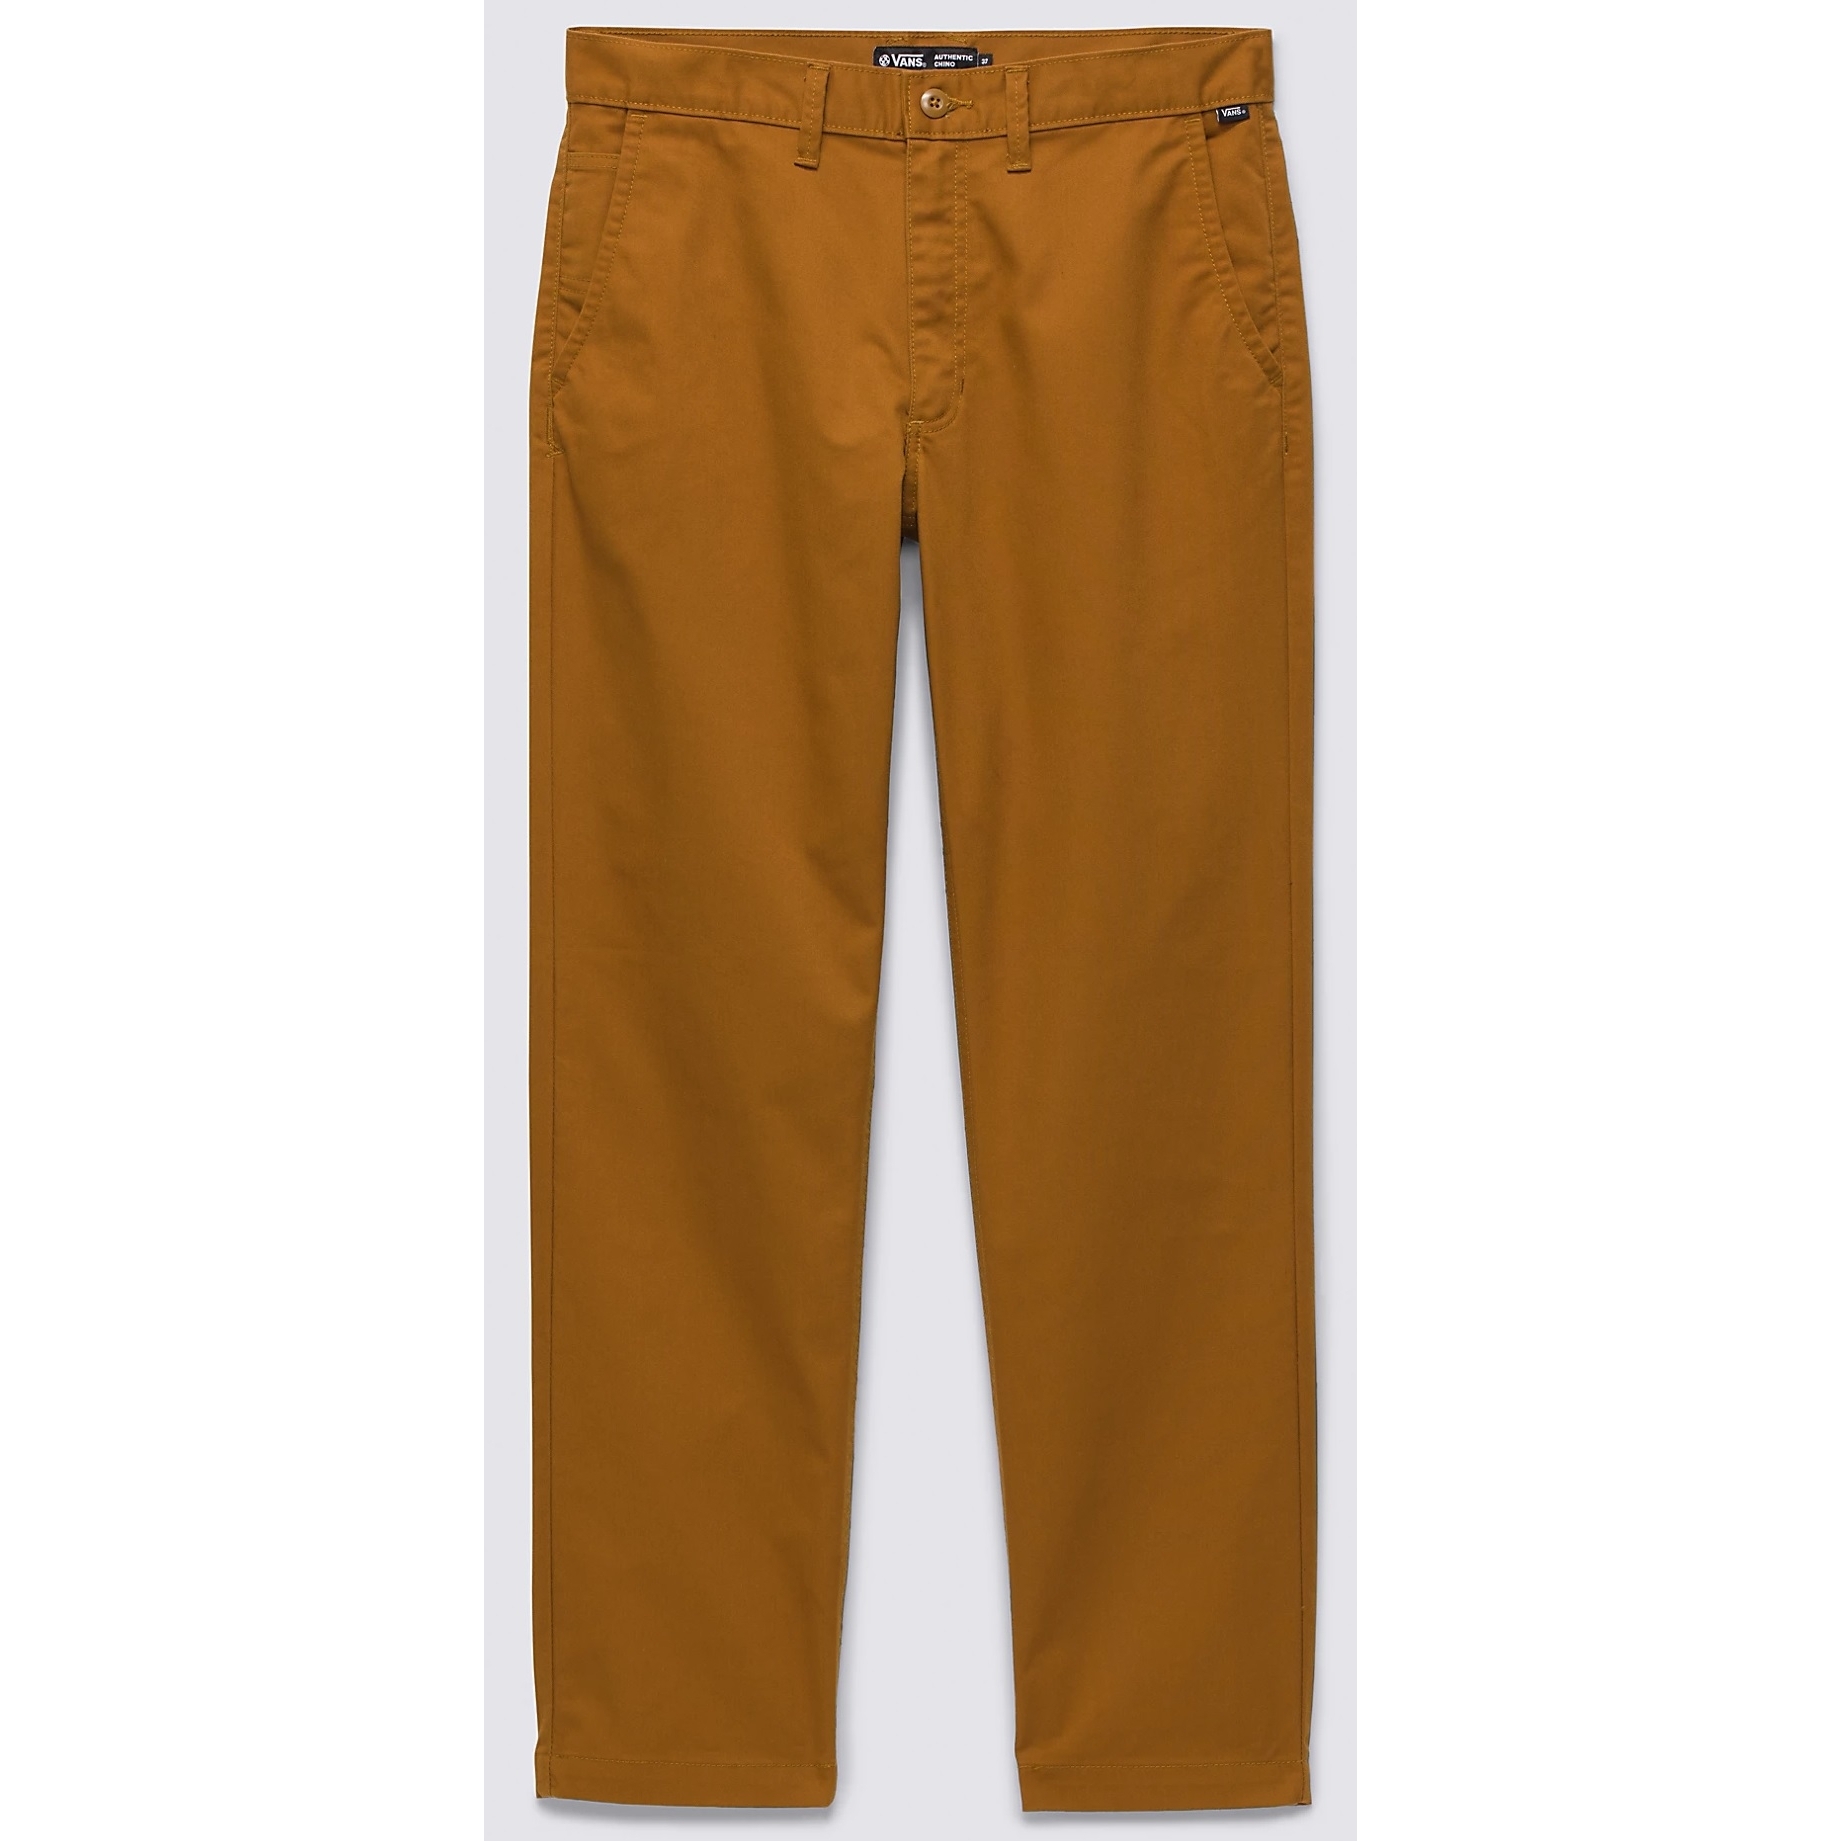 Authentic Chino Relaxed Pant (Golden Brown)